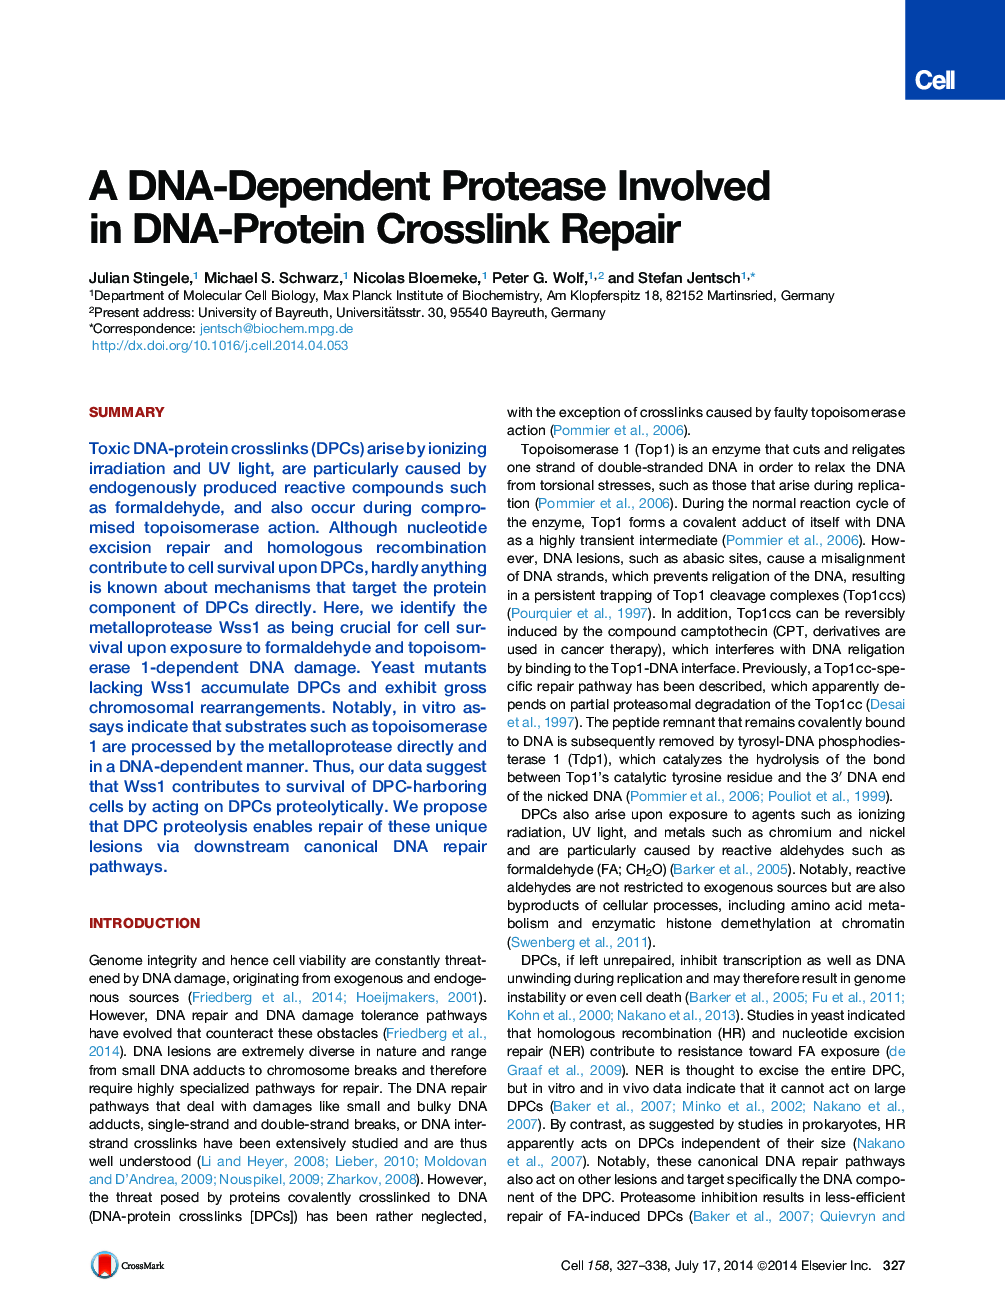 A DNA-Dependent Protease Involved in DNA-Protein Crosslink Repair